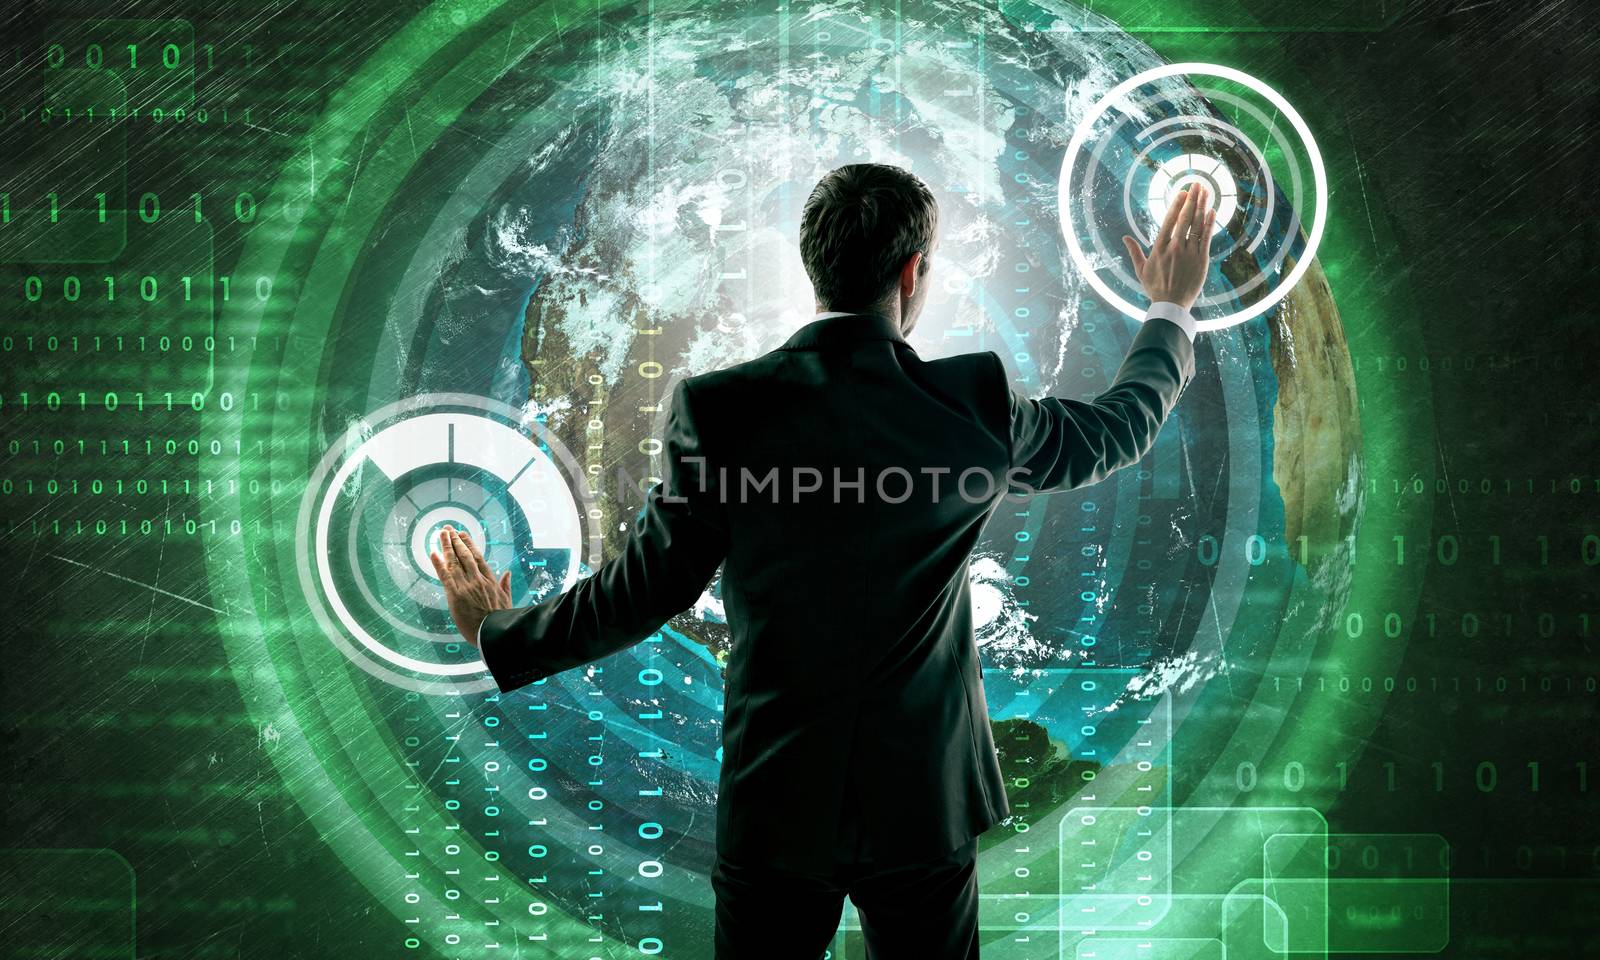 Businessman in suit against digital background with icons and earh globe. Elements of this image furnished by NASA